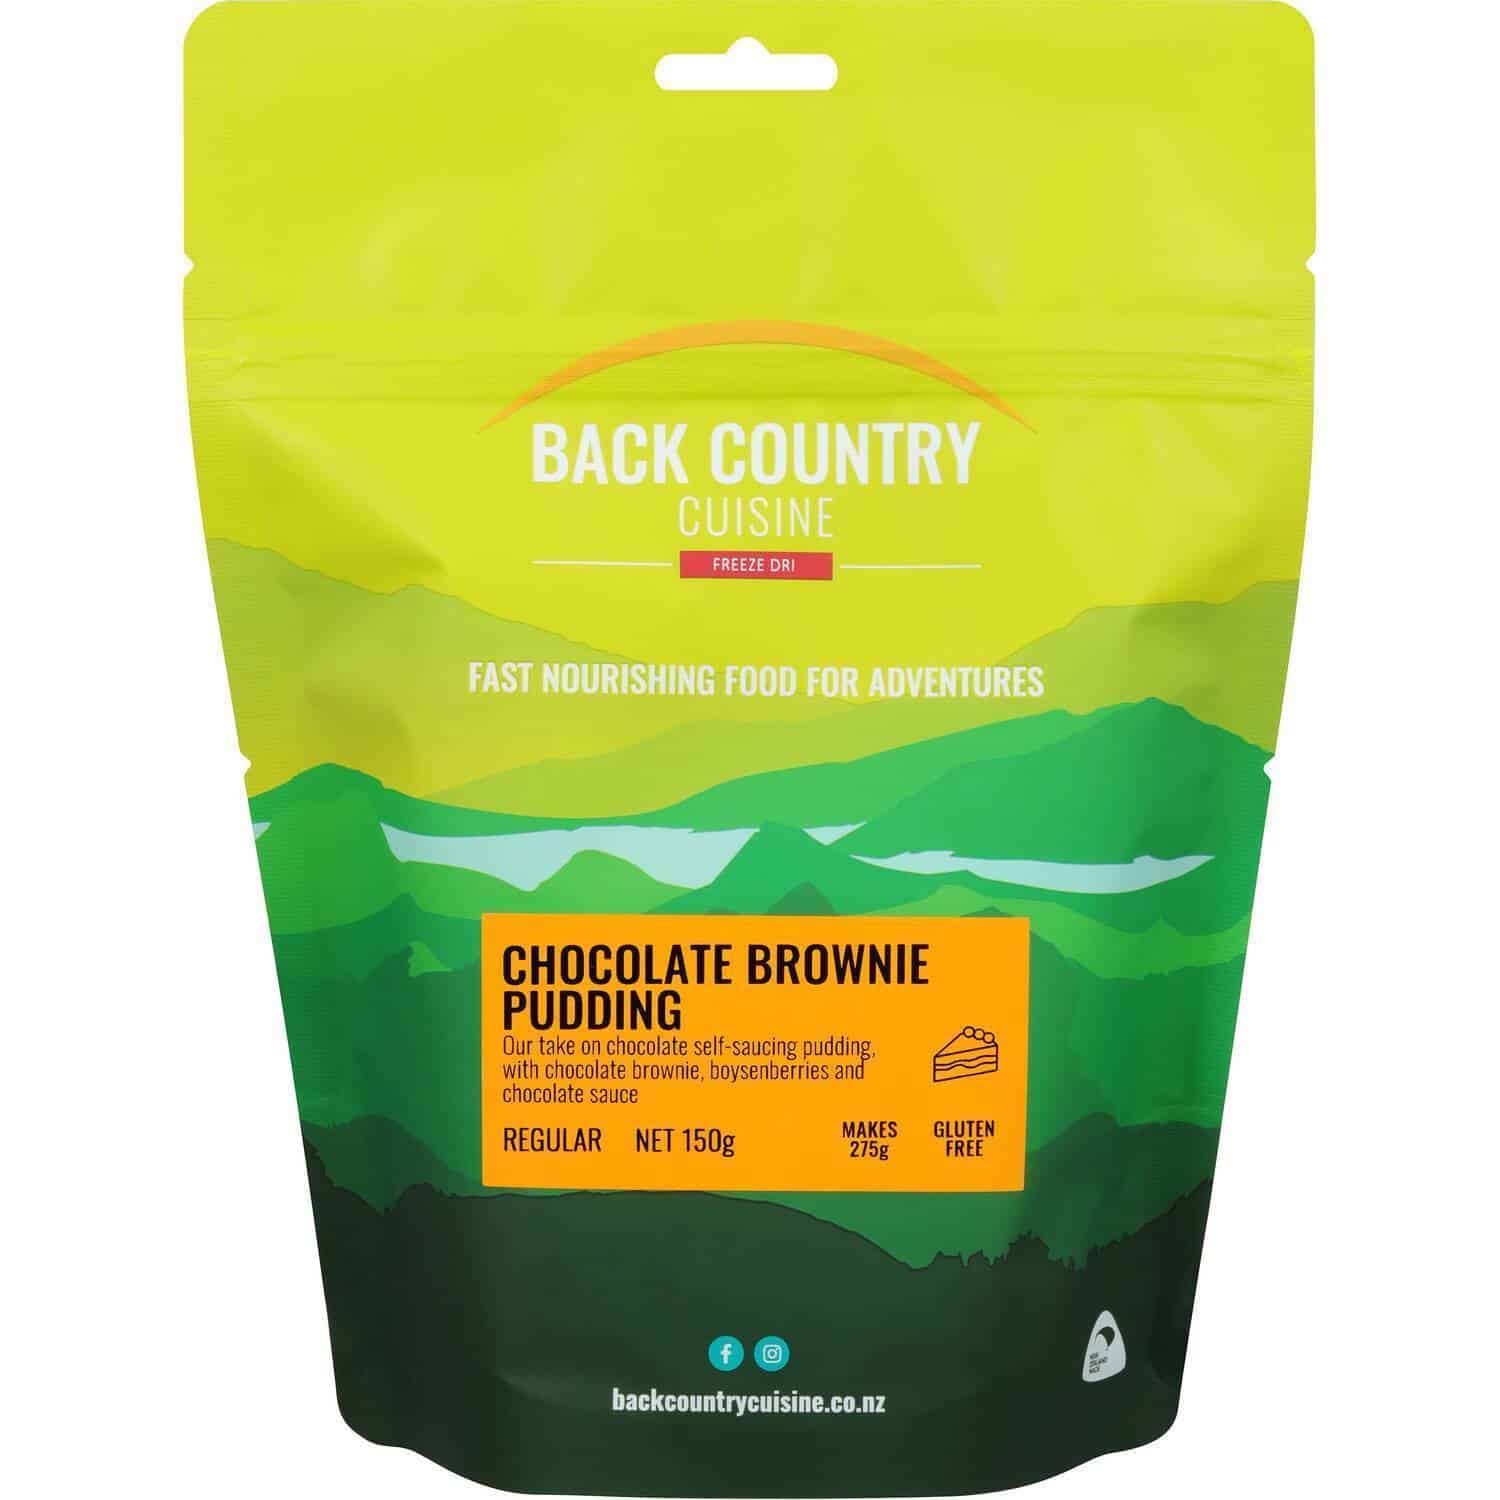 Back Country Cuisine Chocolate Brownie Pudding - Tramping Food and Accessories sold by Venture Outdoors NZ